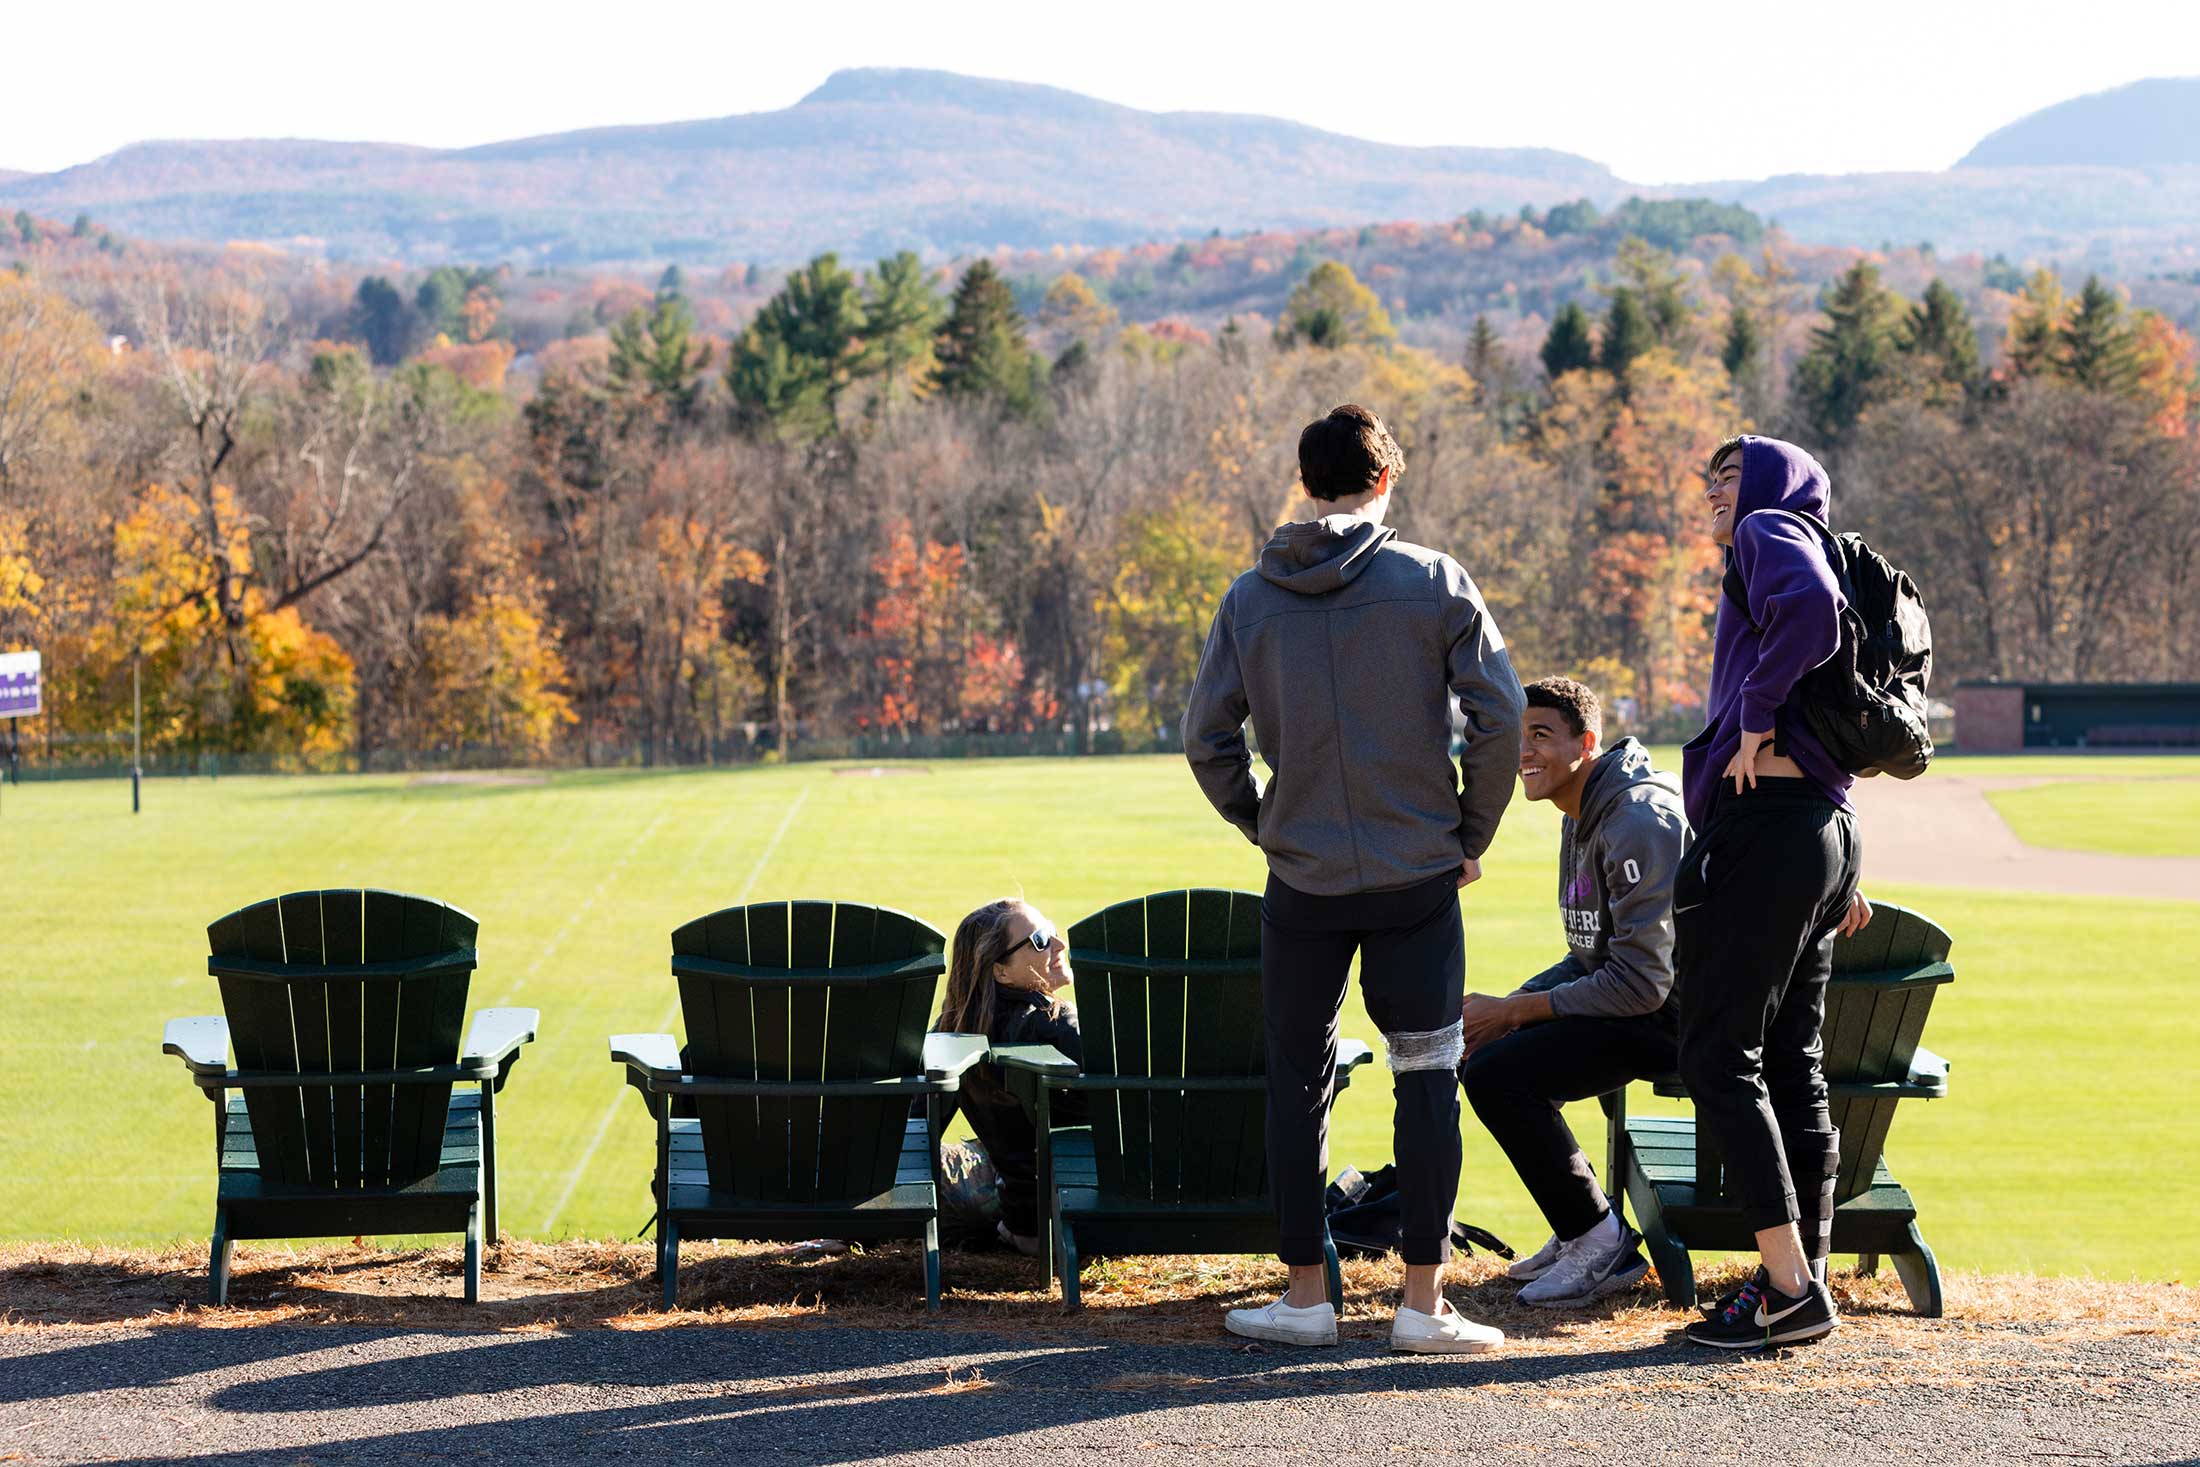 Four students gathered by the adirondack chairs overlooking the Mount Holyoke range